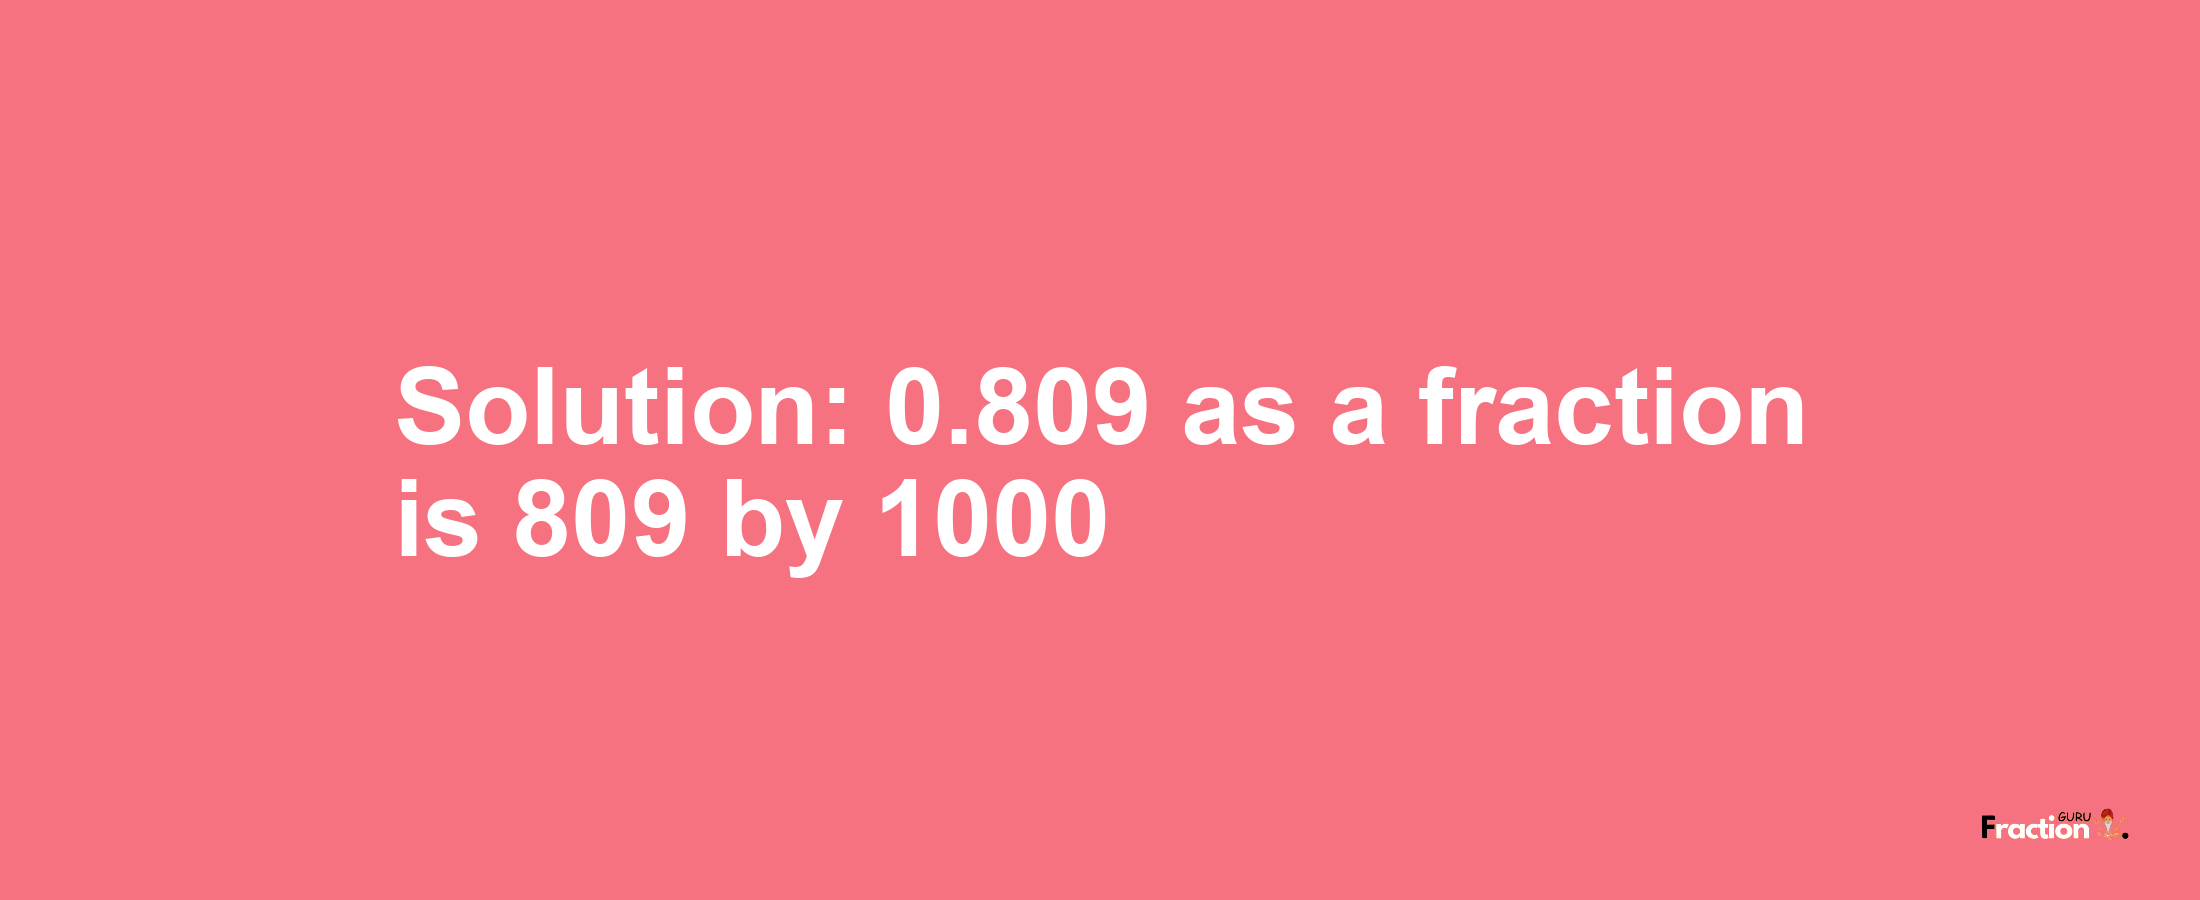 Solution:0.809 as a fraction is 809/1000